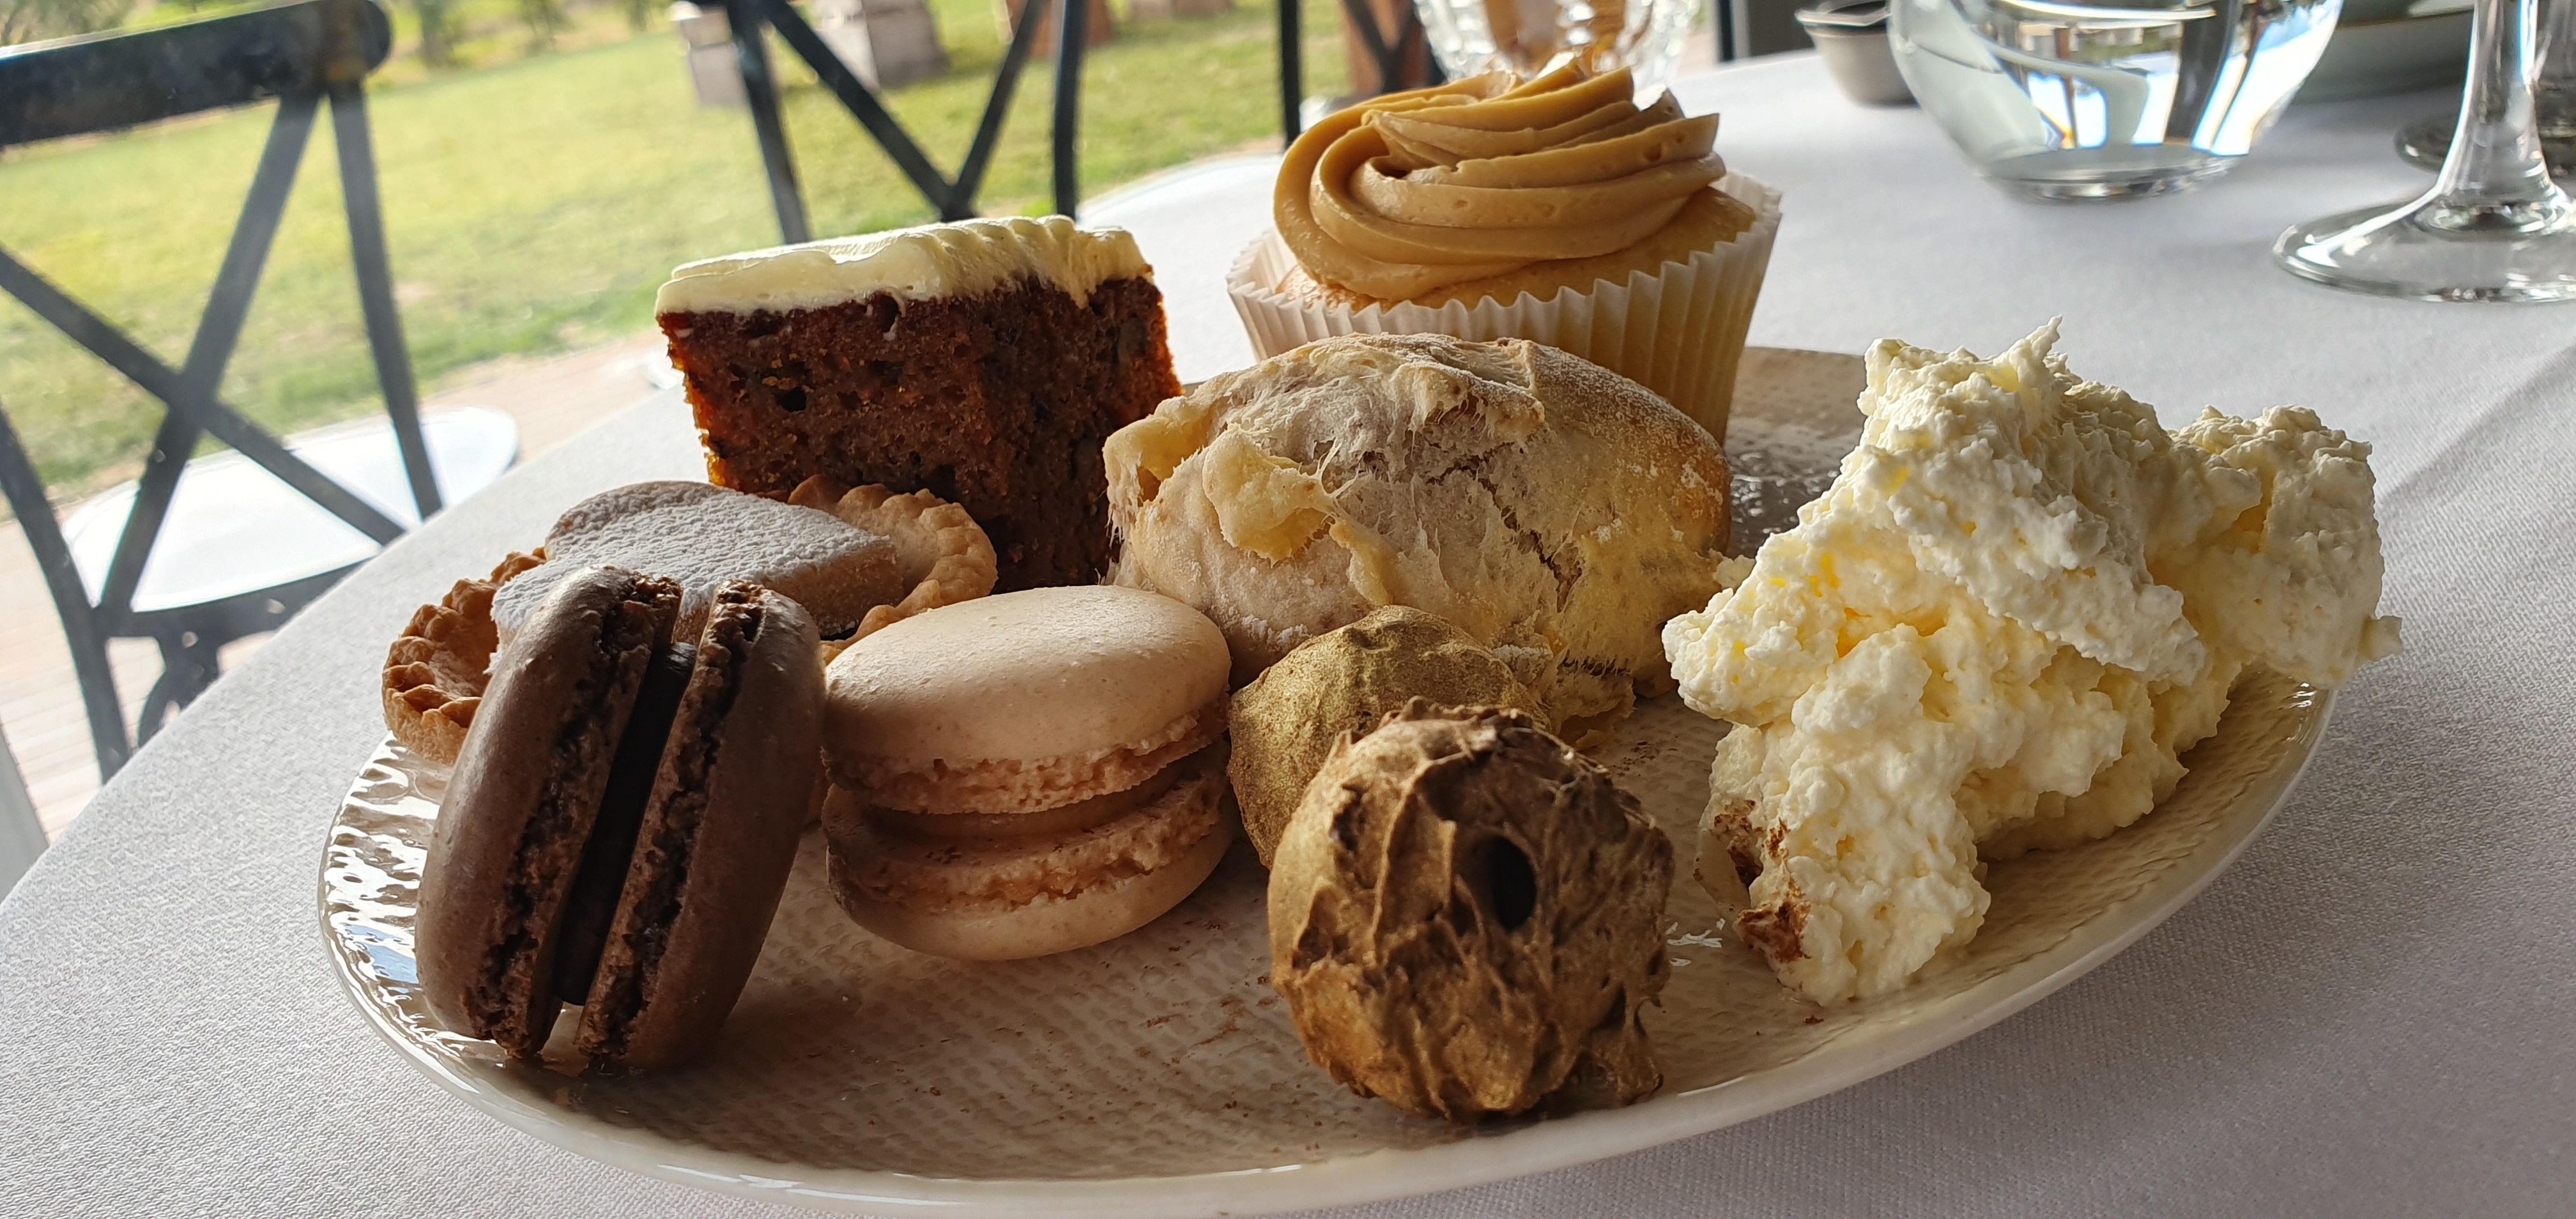 Clockwise from left: chocolate and vanilla macarons, raspberry tarts, carrot cake, apple and walnut scone, caramel cup cakes, peach jam and whipped cream, gold-dusted chocolate truffles.